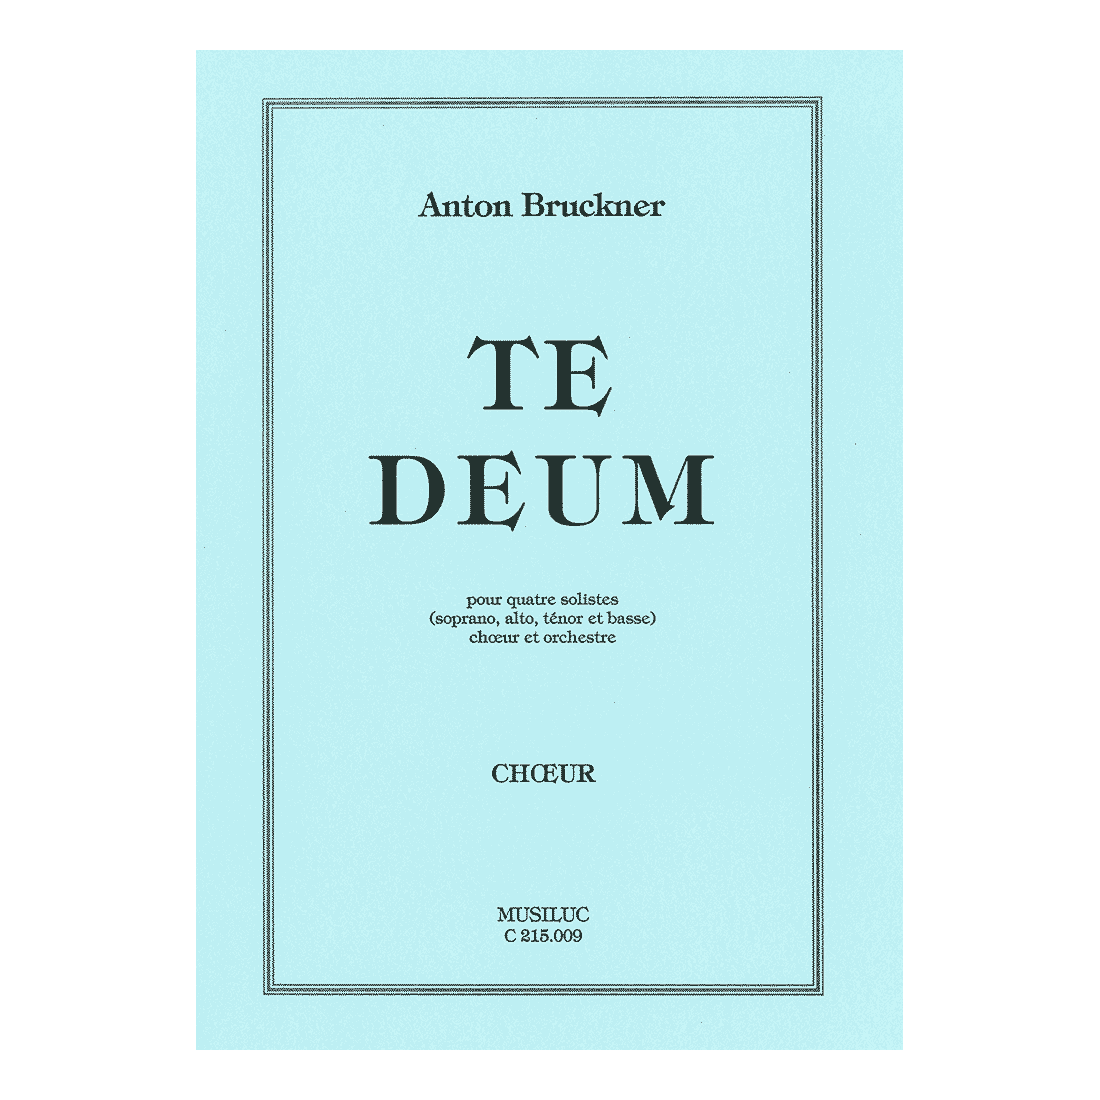 Te deum for 4 soloists, choir and orchestra